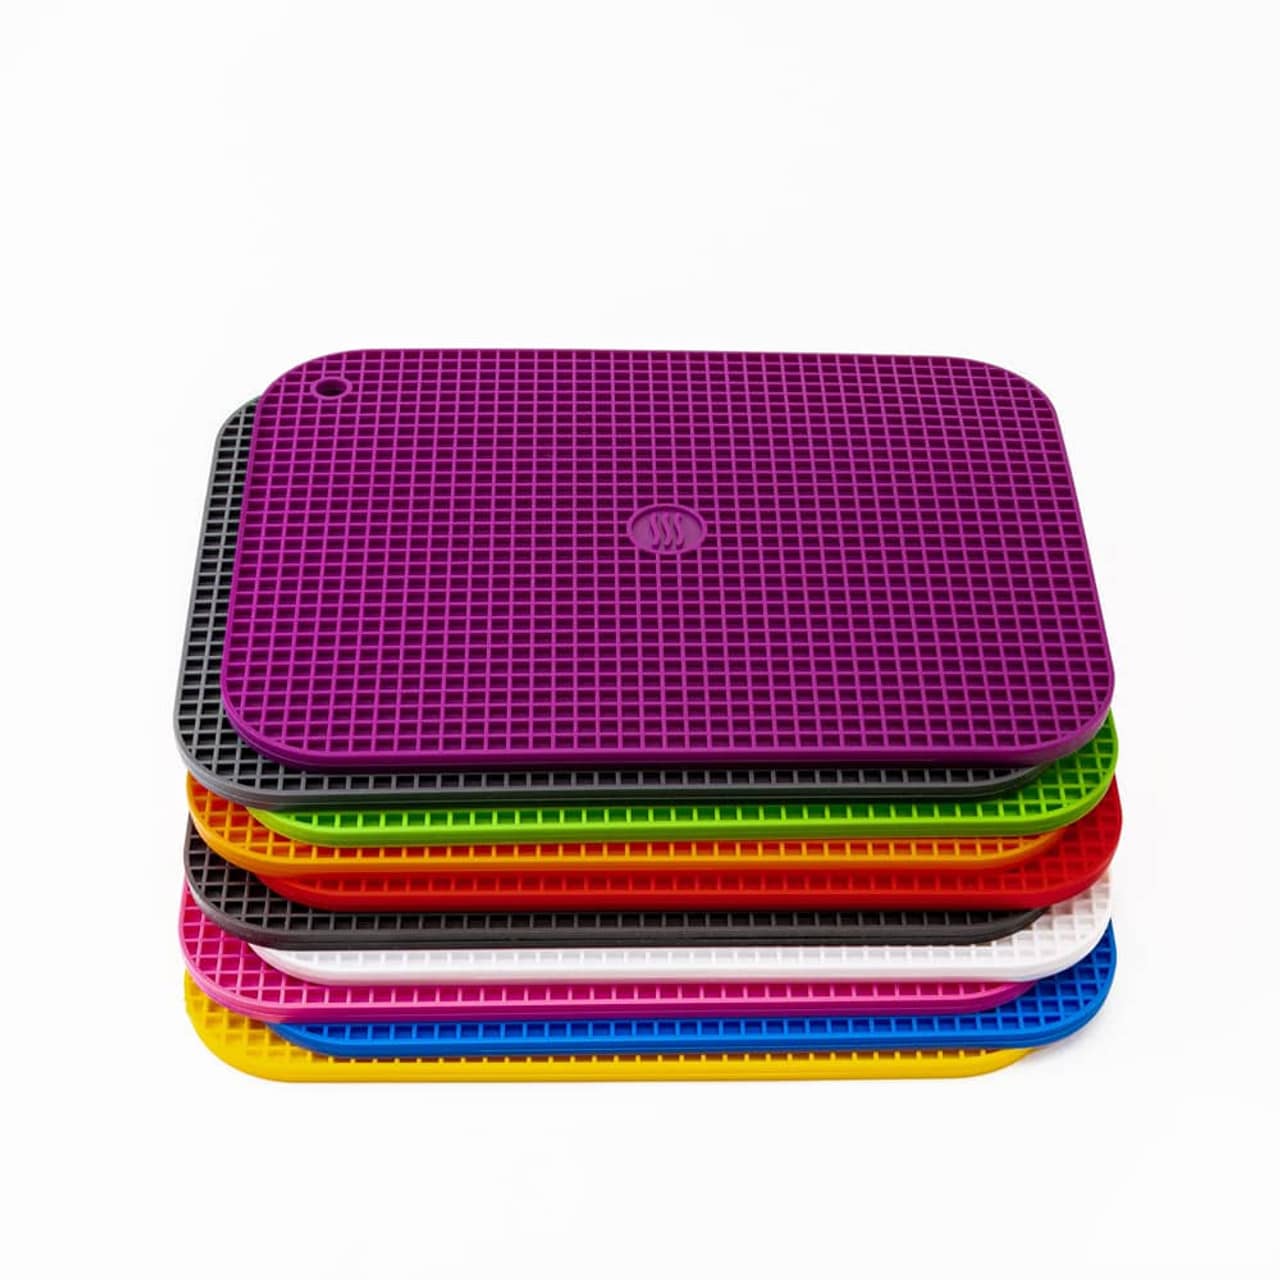 stack of different colored large 9X12 trivets